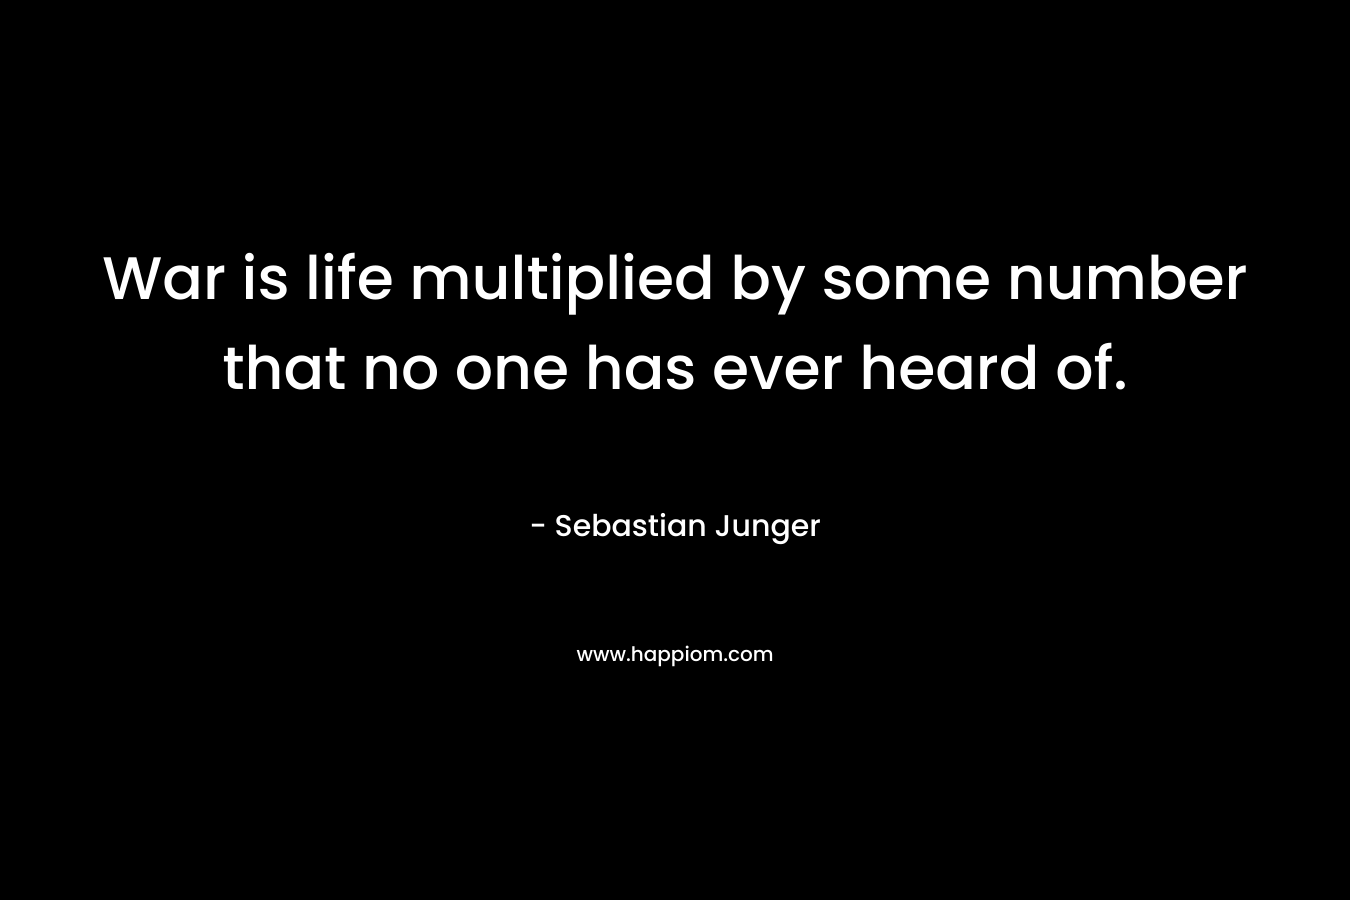 War is life multiplied by some number that no one has ever heard of. – Sebastian Junger